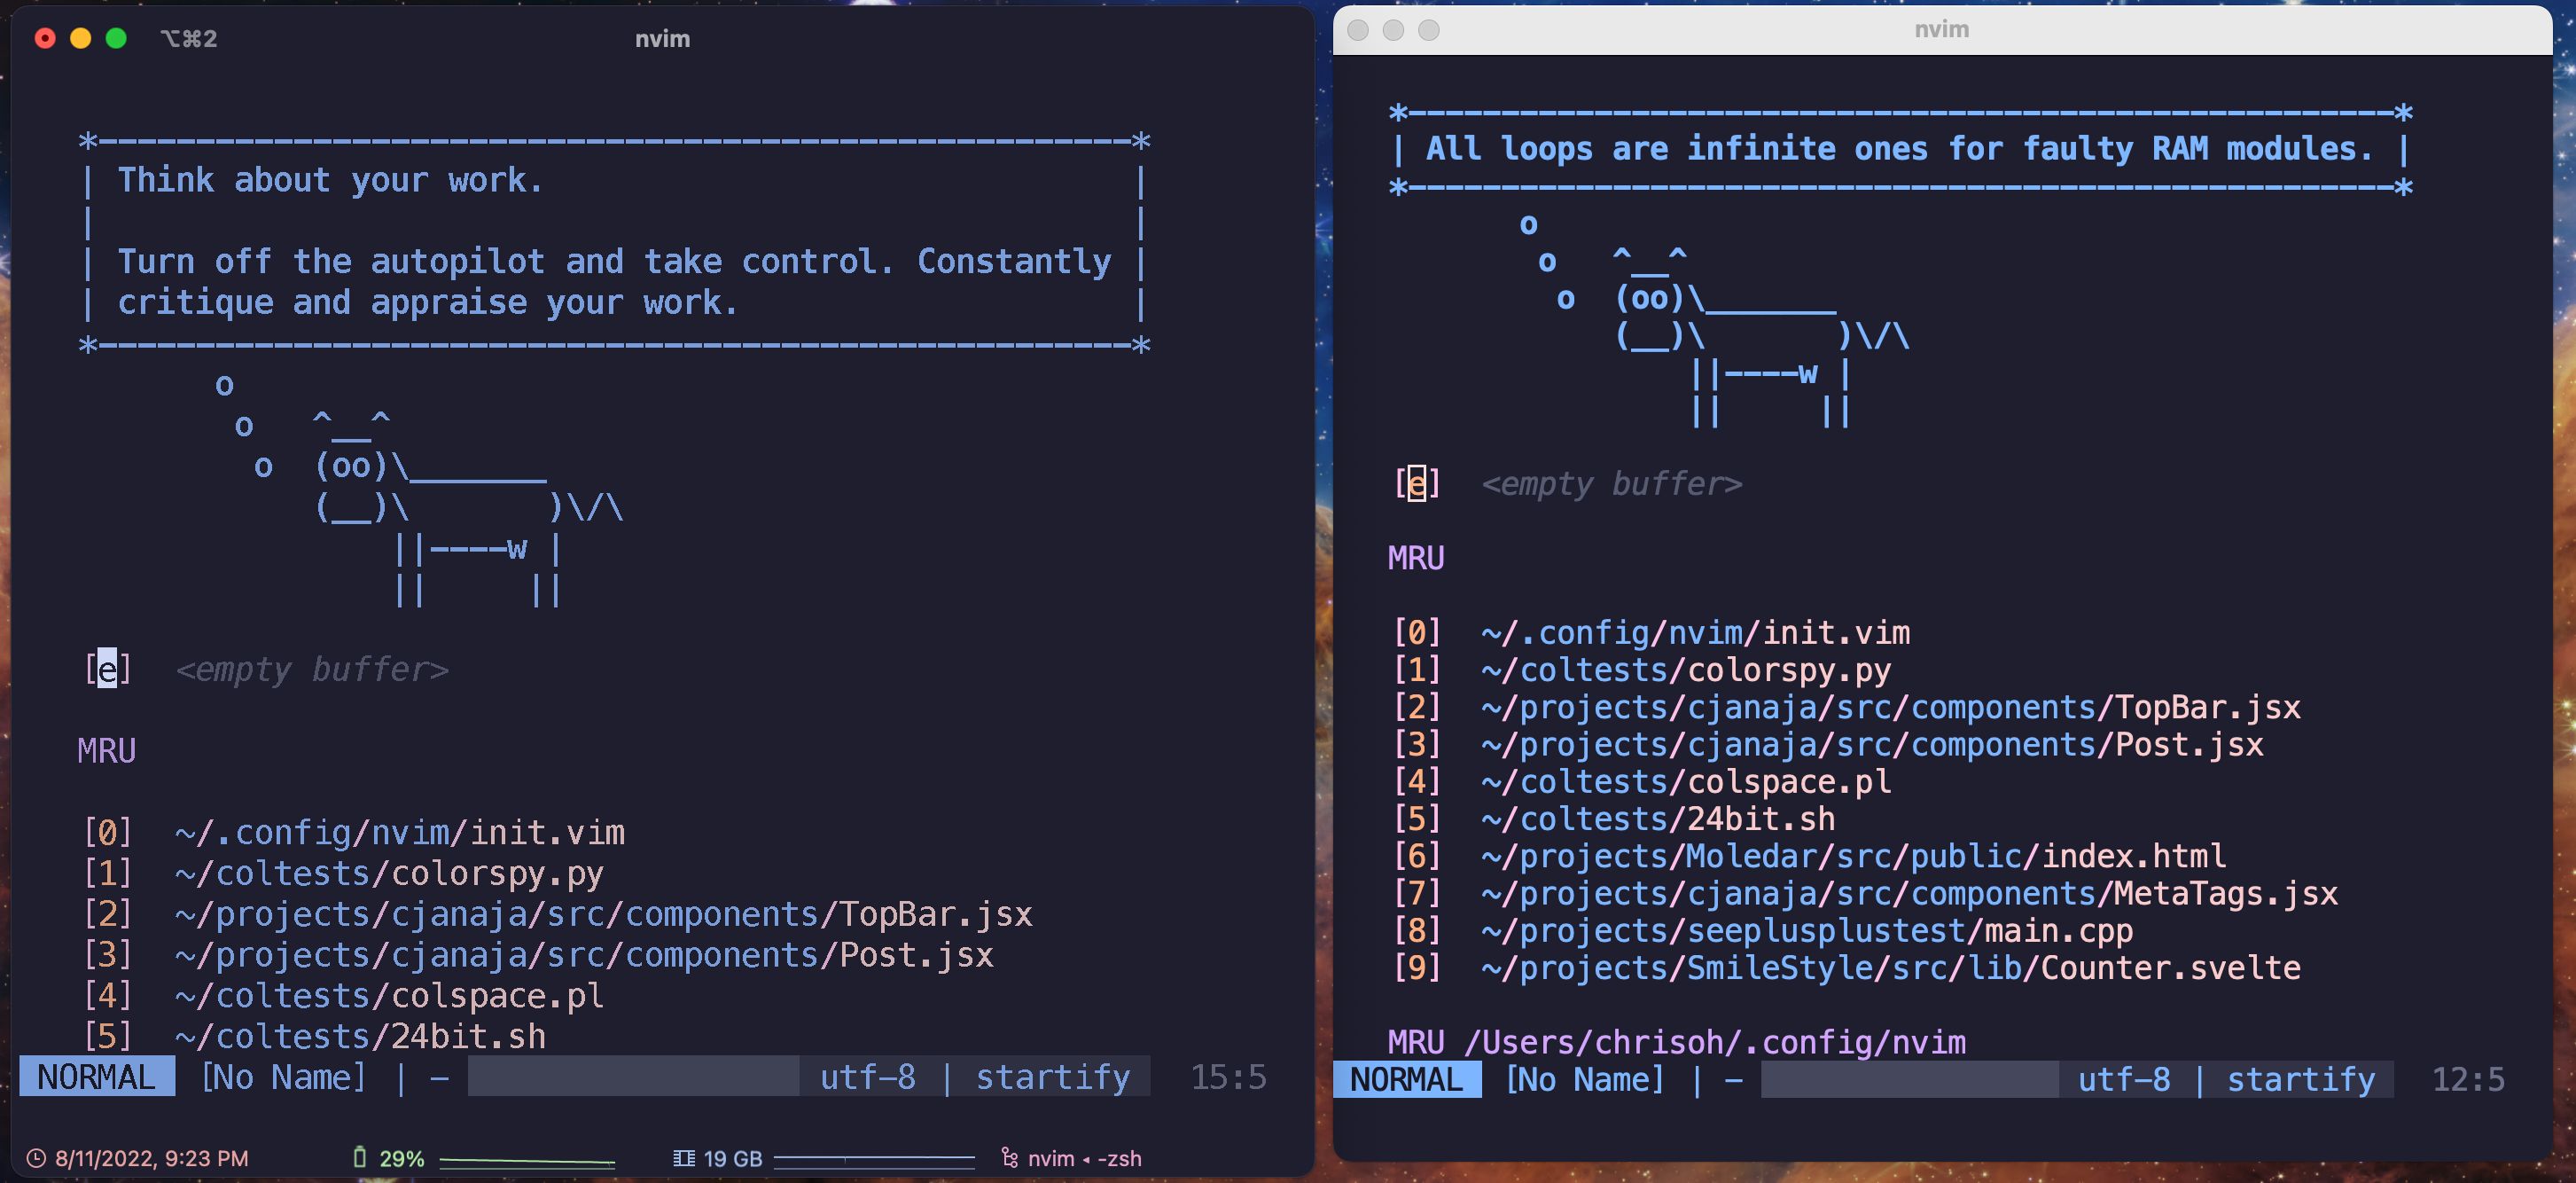 iterm on the left and alacritty on the right with iterm having heaveir font because antialiasing is off